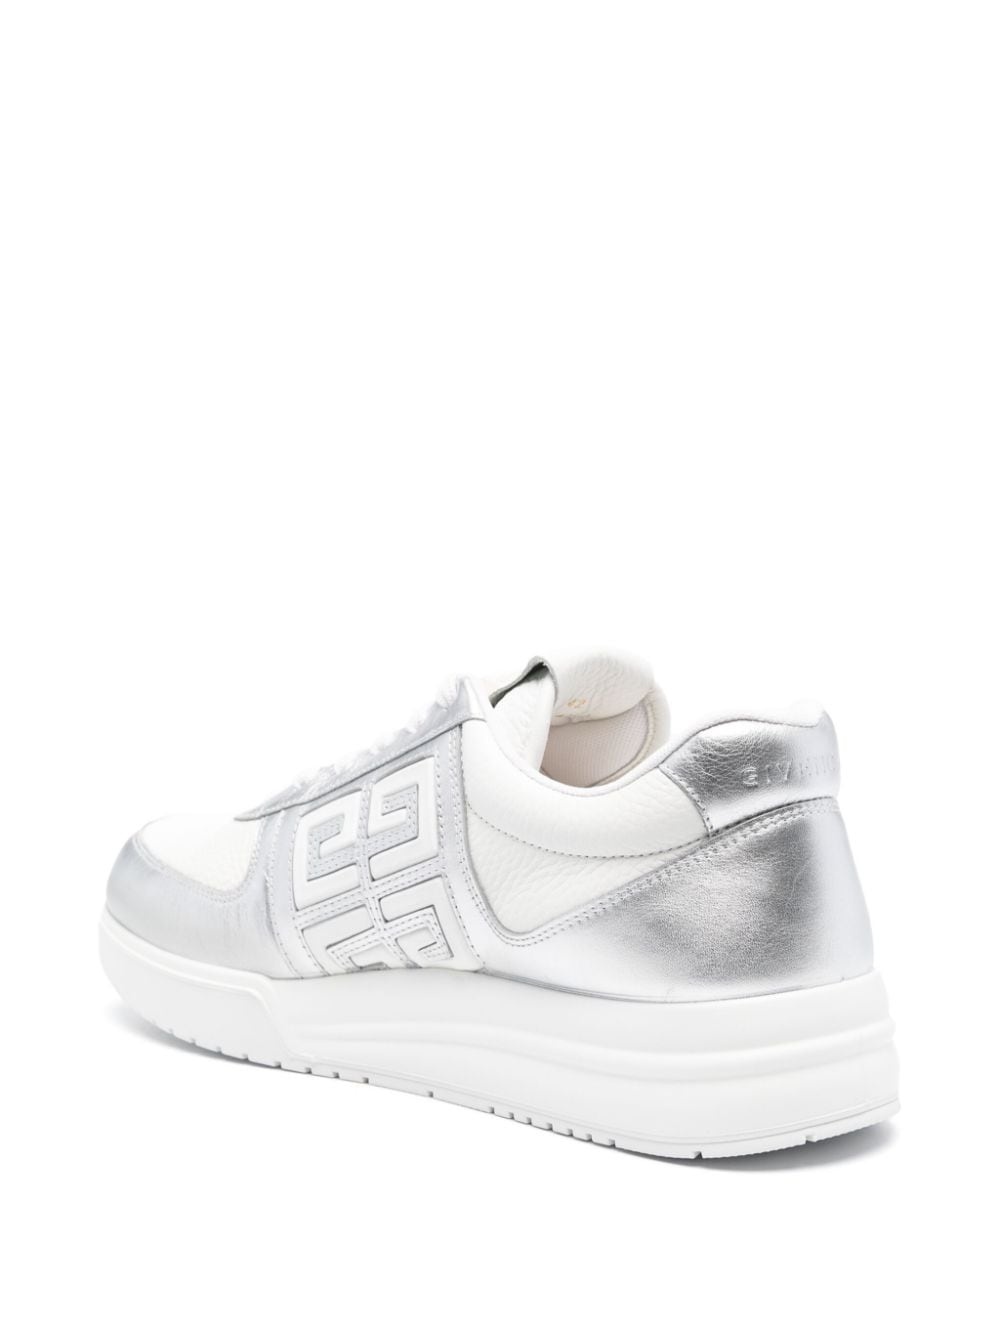 4G-embellished leather sneakers - 3